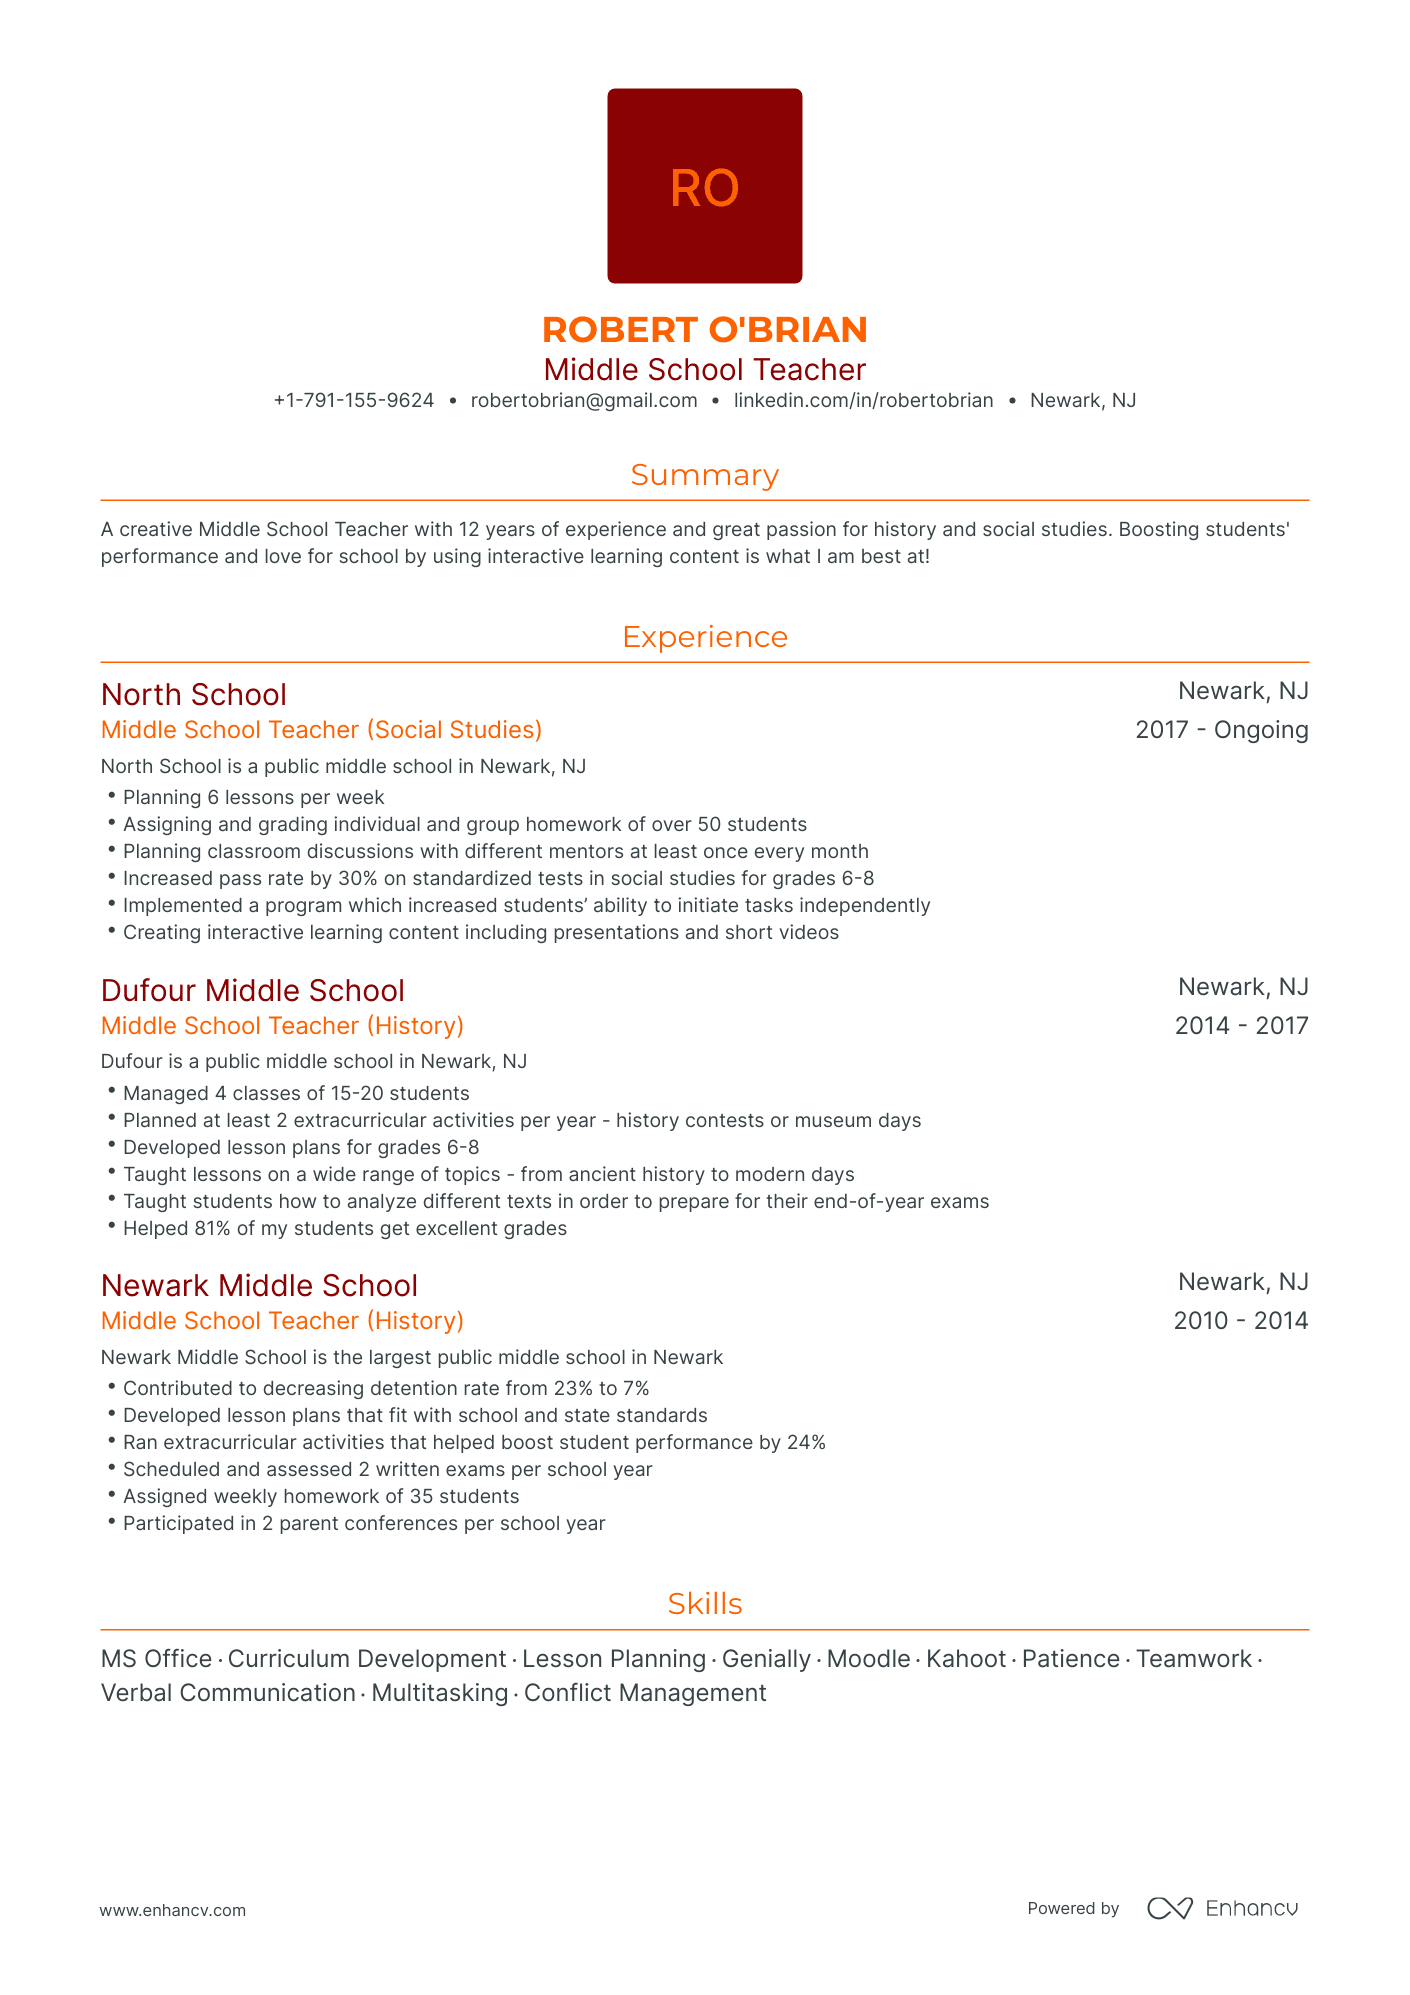 Traditional Middle School Teacher Resume Template